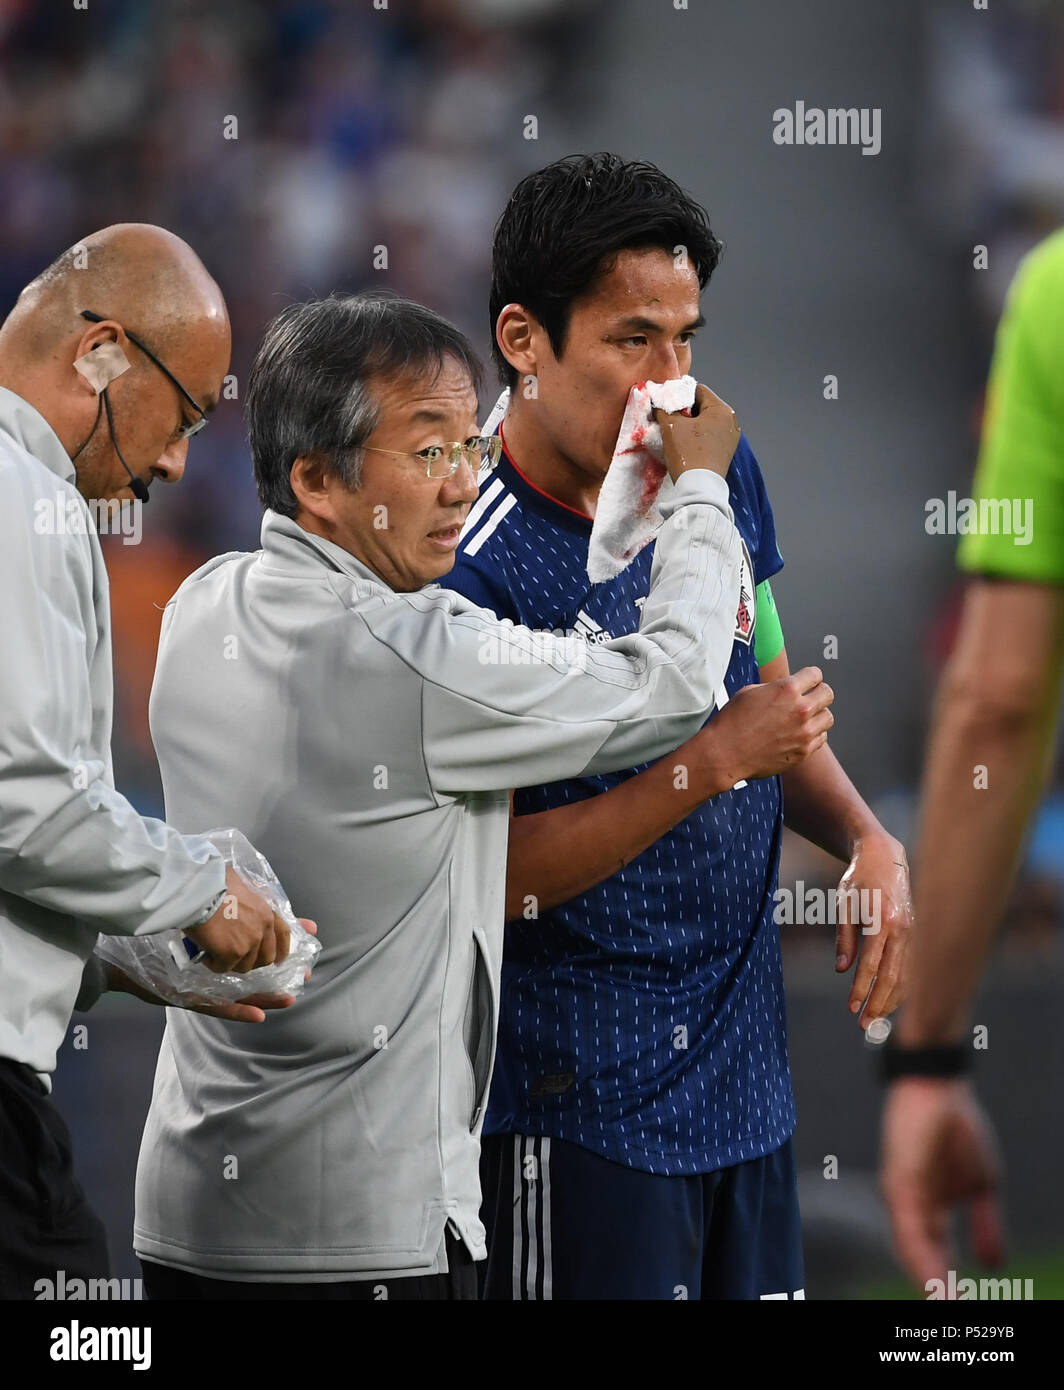 Yekaterinburg, Russia. 24th June, 2018. Makoto Hasebe (R) of Japan receives medical treatment during the 2018 FIFA World Cup Group H match between Japan and Senegal in Yekaterinburg, Russia, June 24, 2018. Credit: Chen Cheng/Xinhua/Alamy Live News Stock Photo